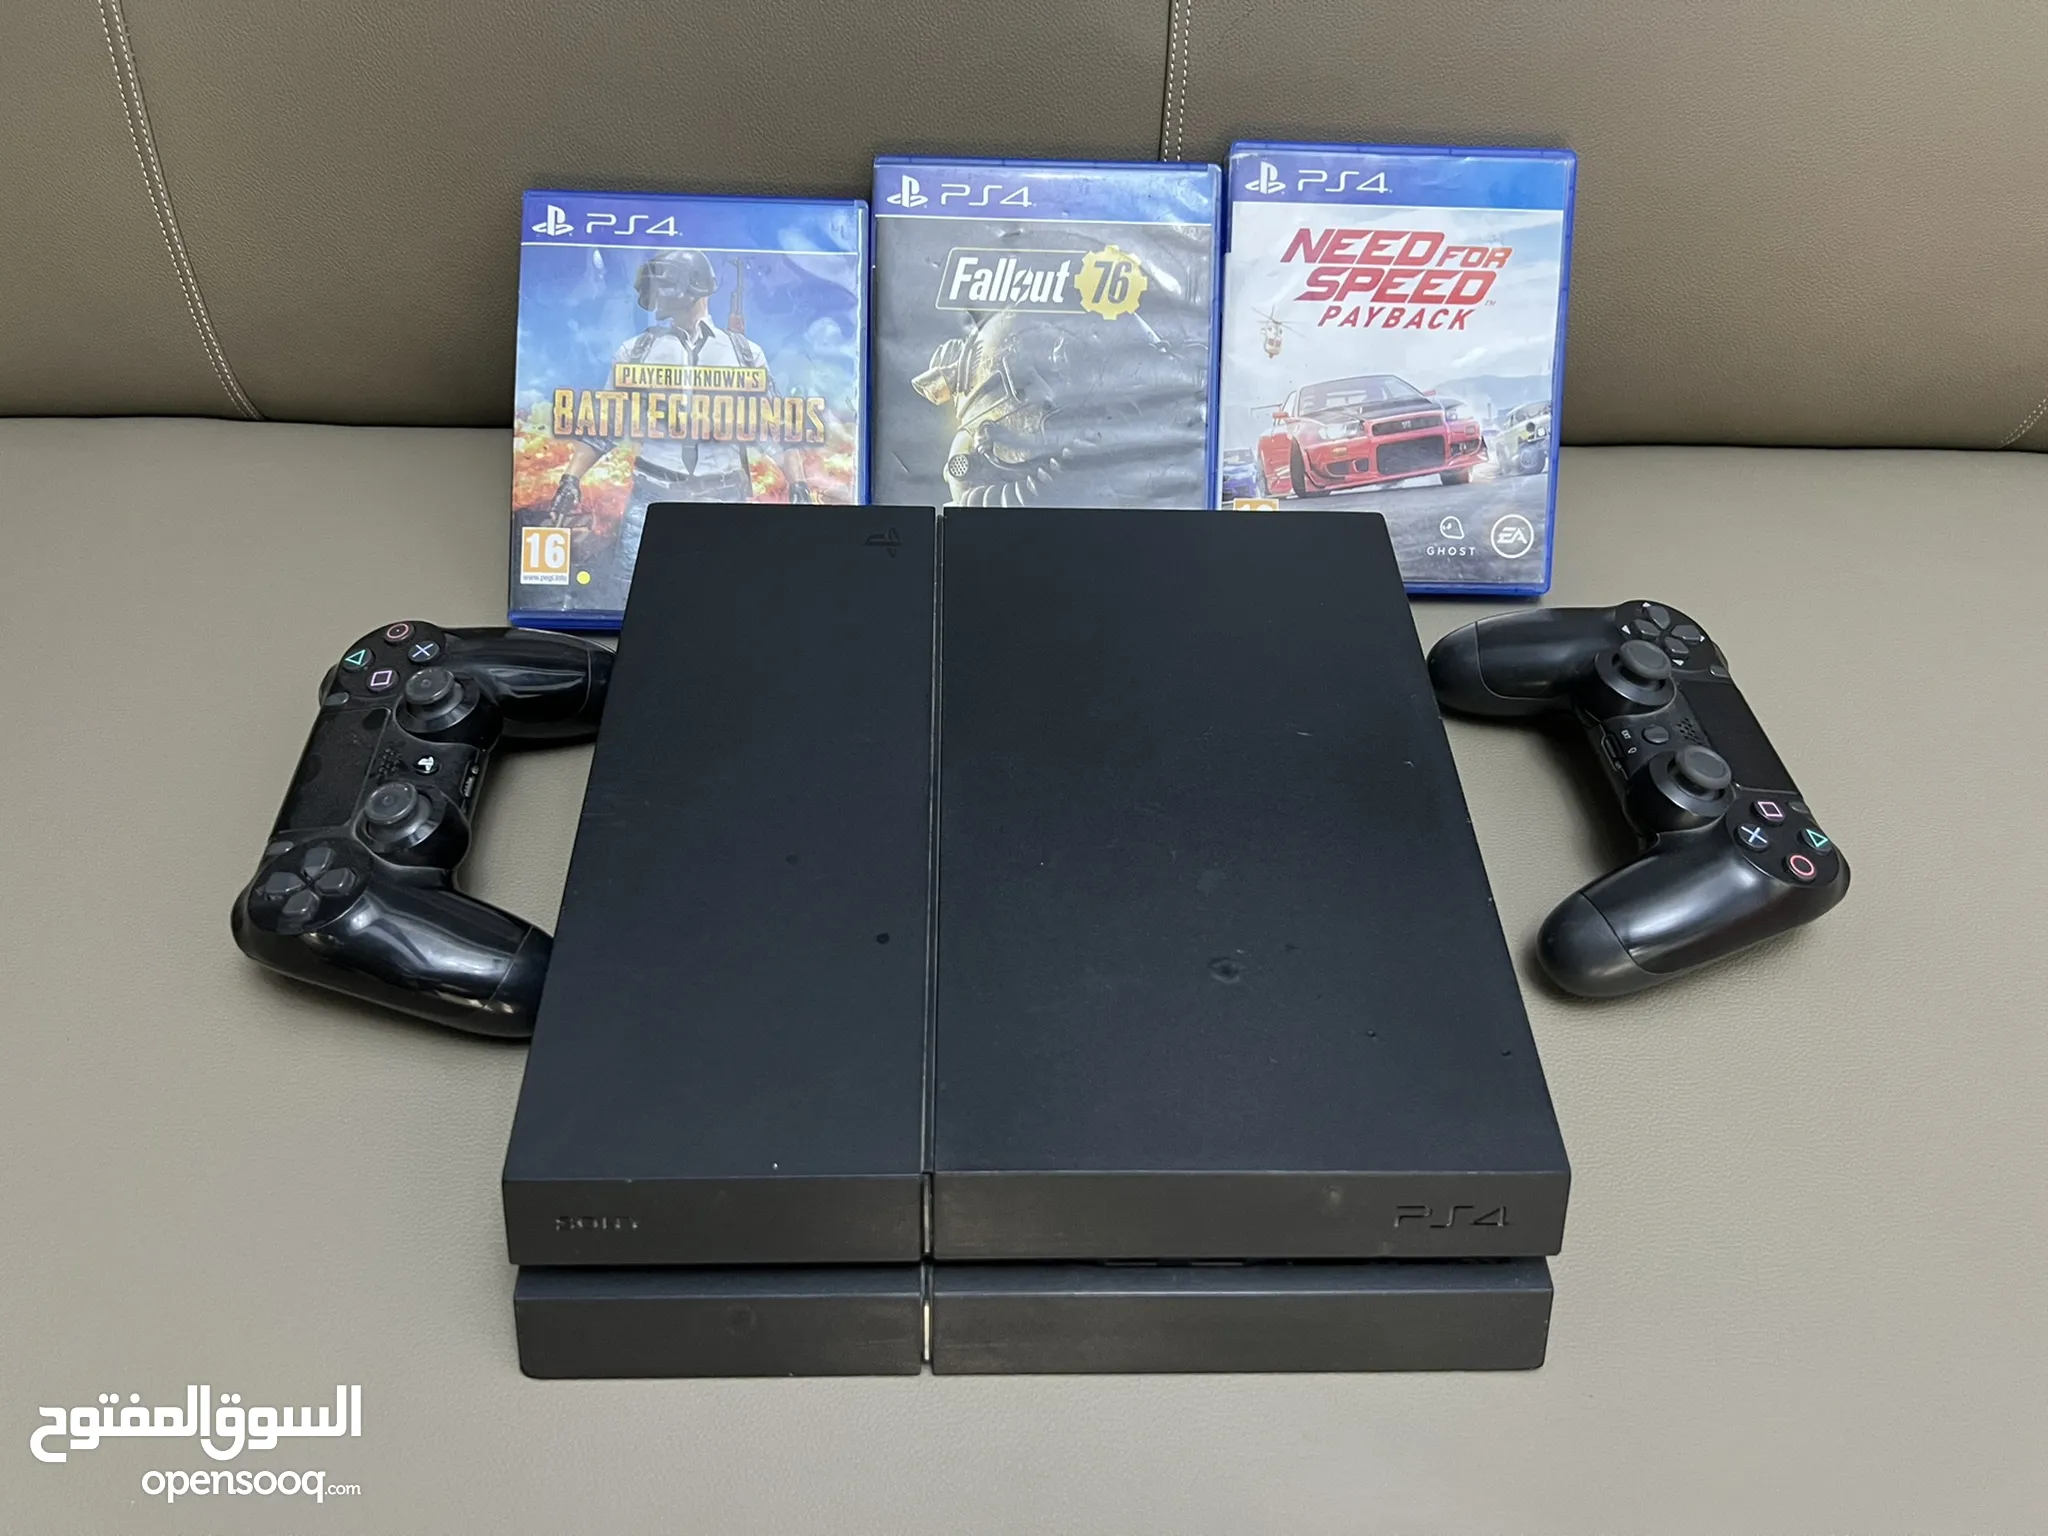 Playstation 4 For Sale in Misrata : Used : Best Prices | OpenSooq